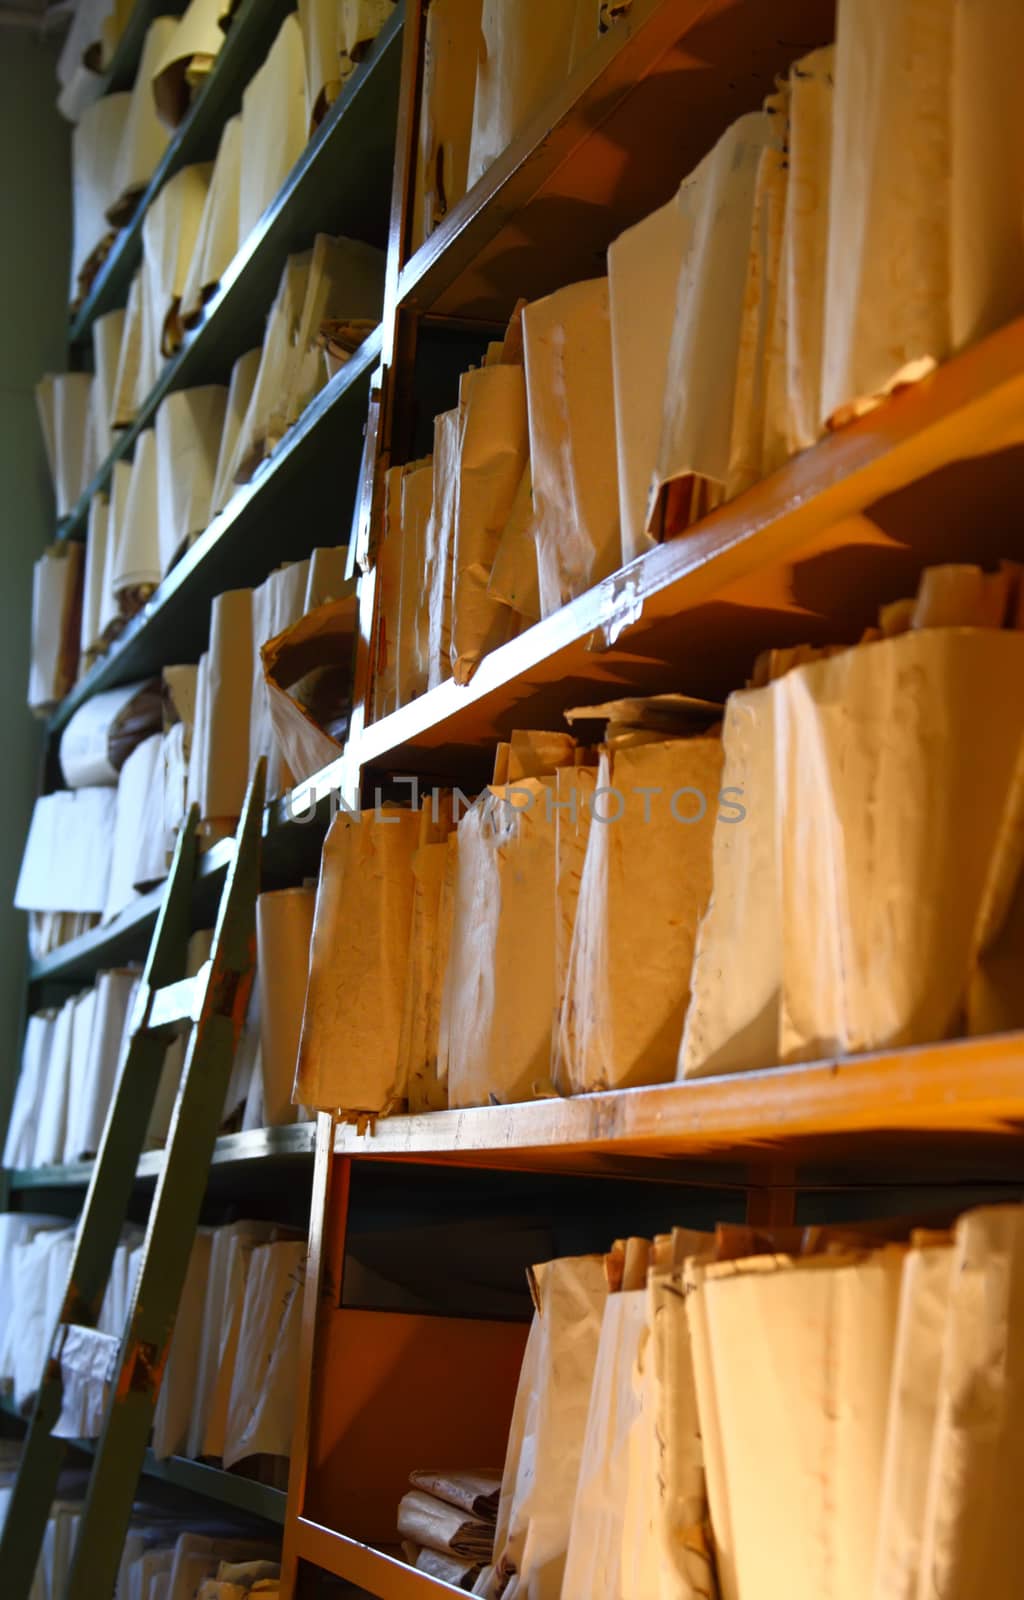 Shelves with paper document in archive